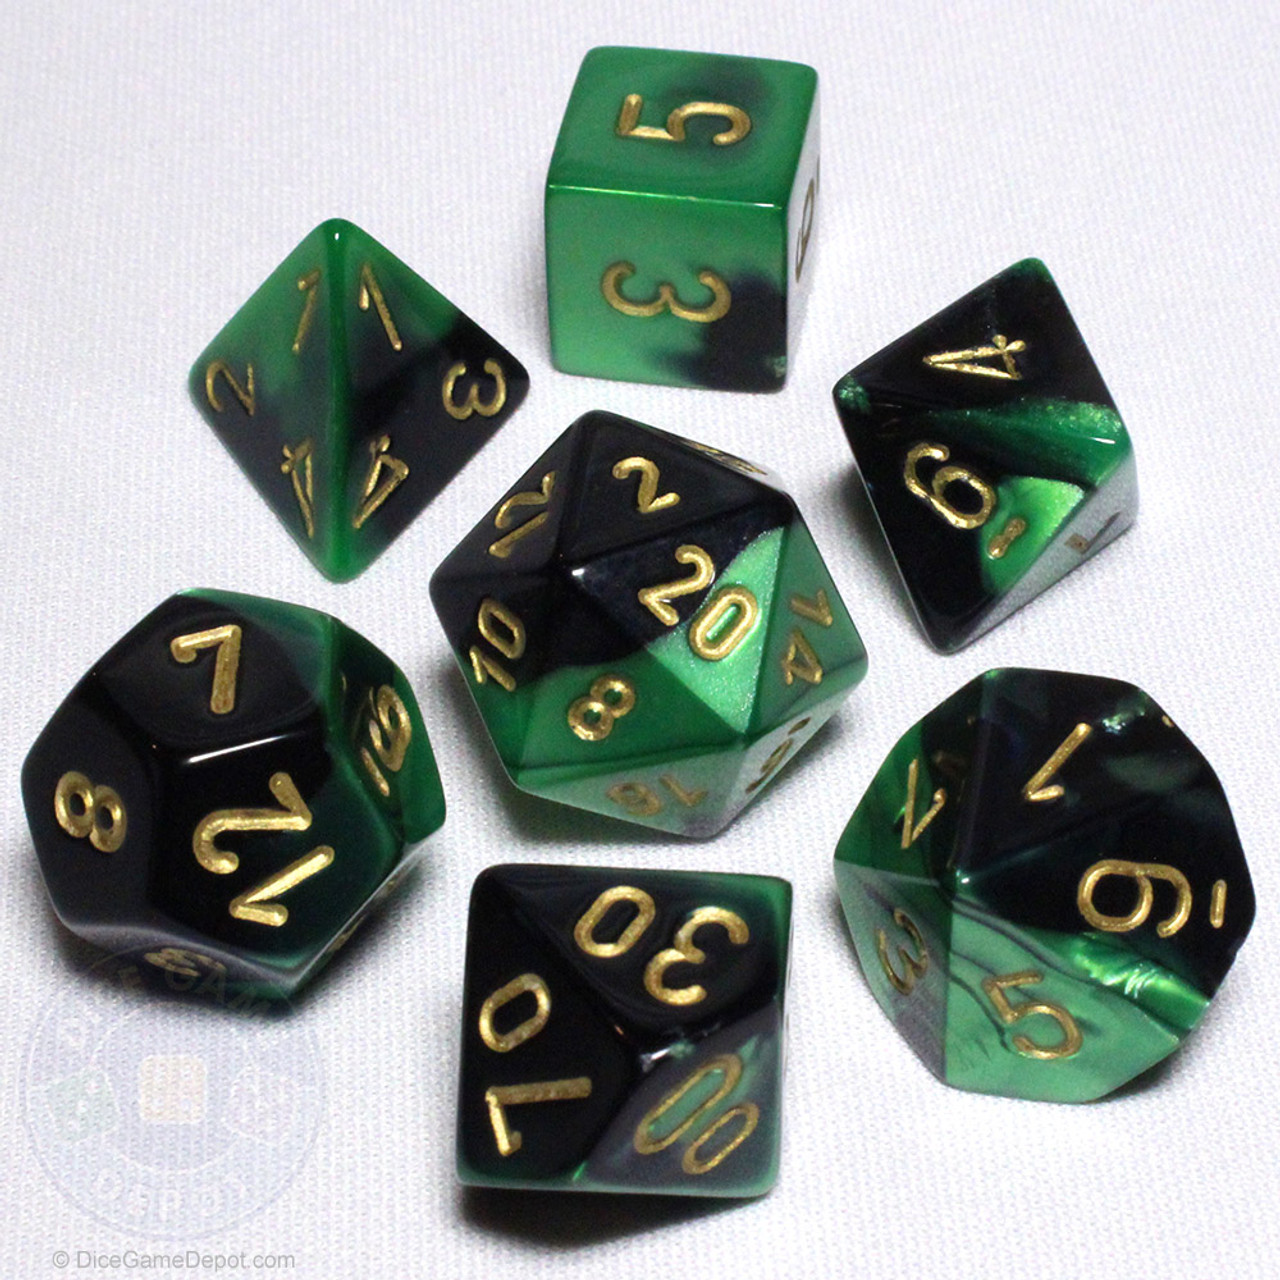 NEW 5 Transparent Green RPG Bunco Gaming Dice Set 16mm D6 Great Home Casino 